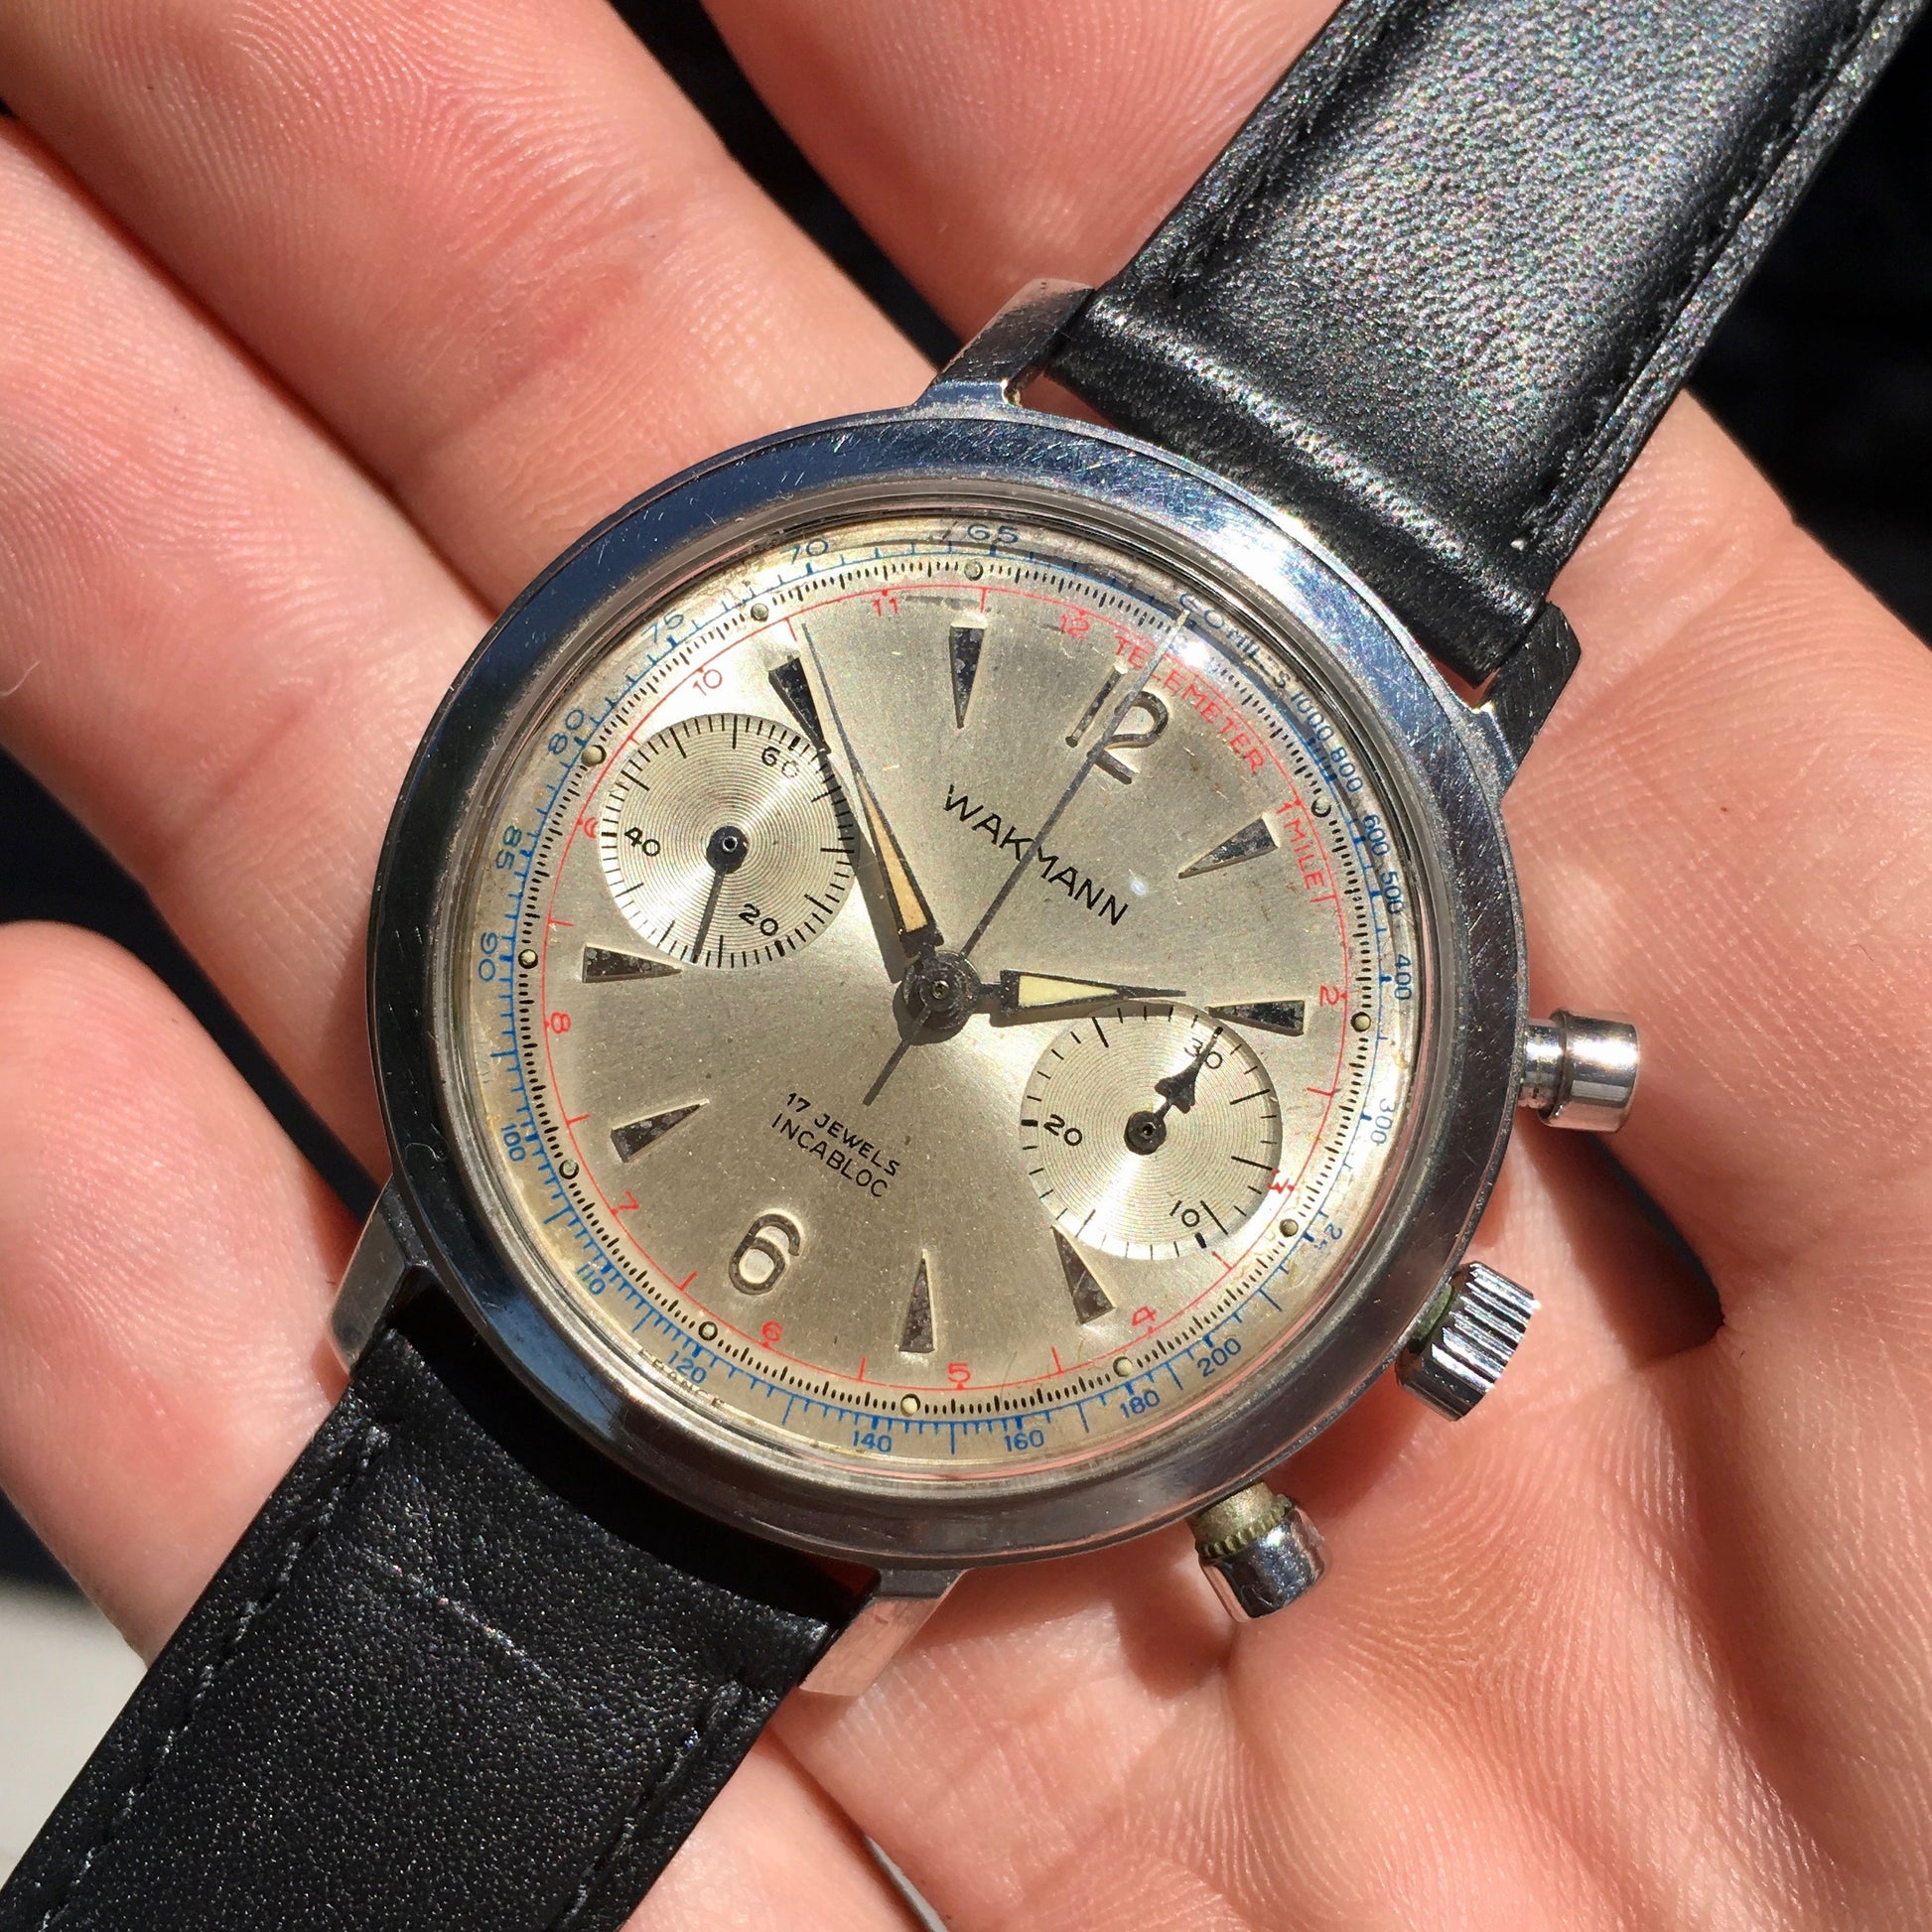 Vintage Wakmann Stainless Steel Chronograph Manual Wind Venus 188 Large Size Wristwatch - Hashtag Watch Company